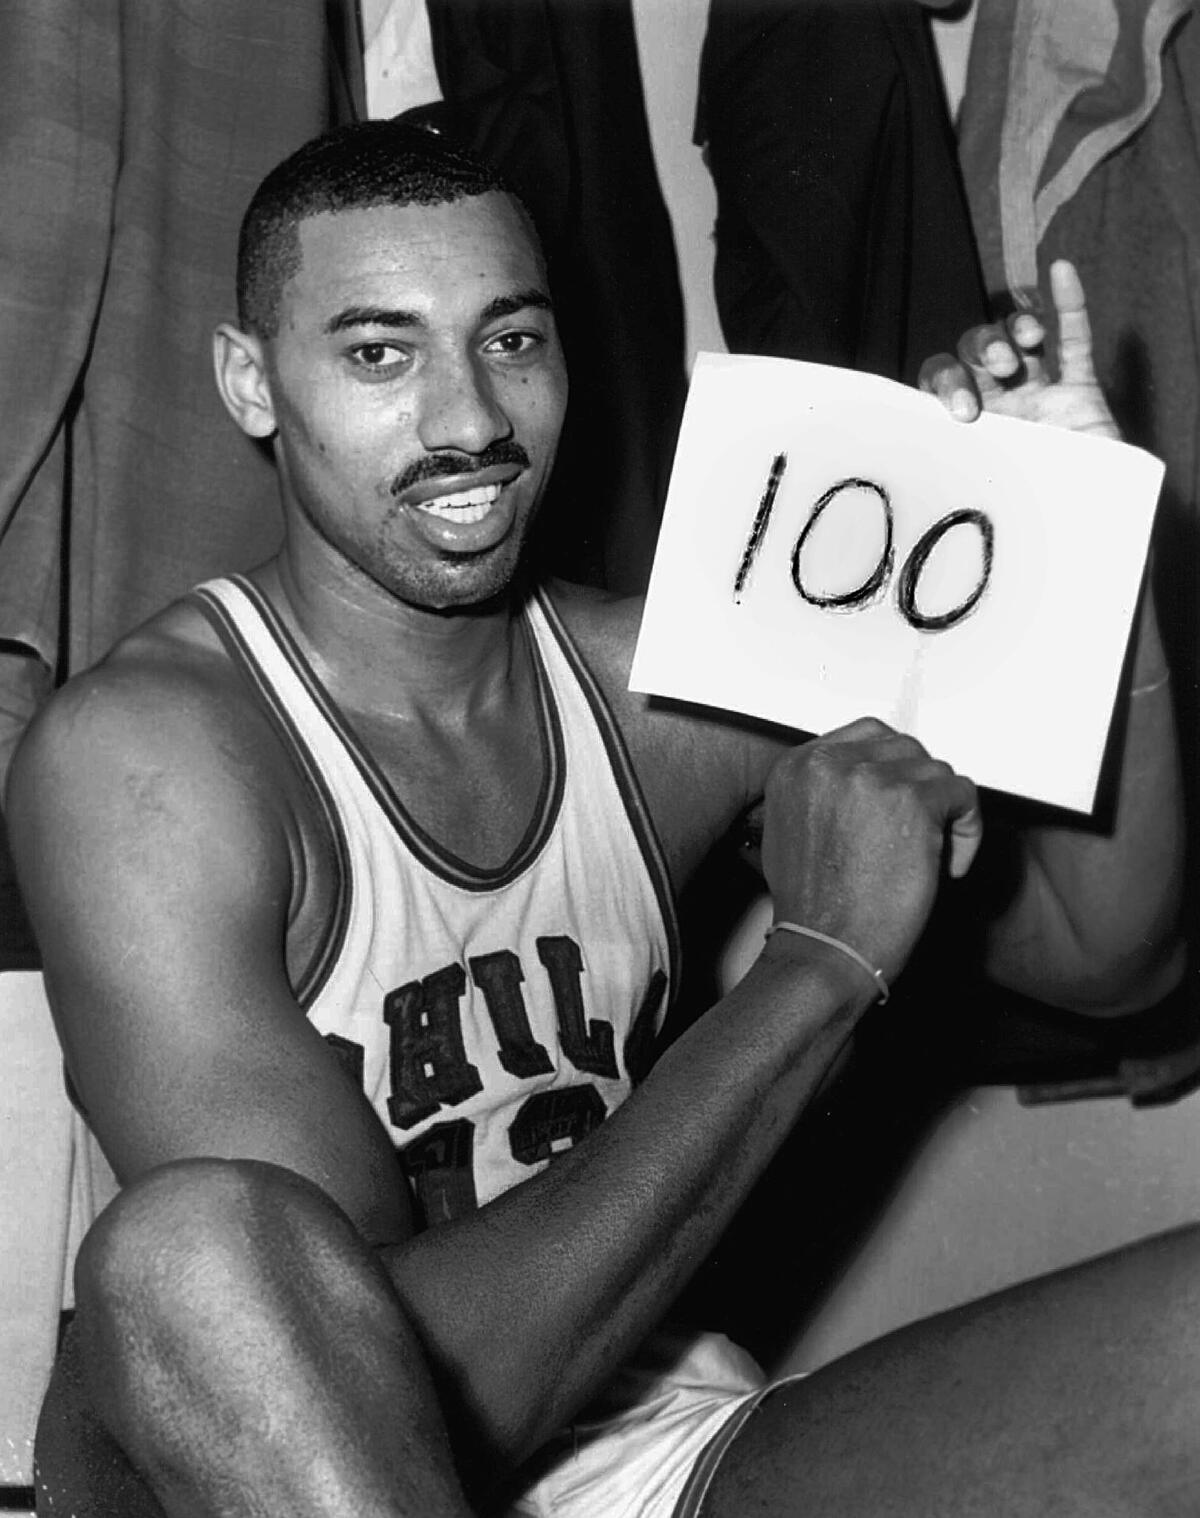 On March 2, 1962, Wilt Chamberlain of the Philadelphia Warriors holds a sign reading "100" after he scored 100 points.